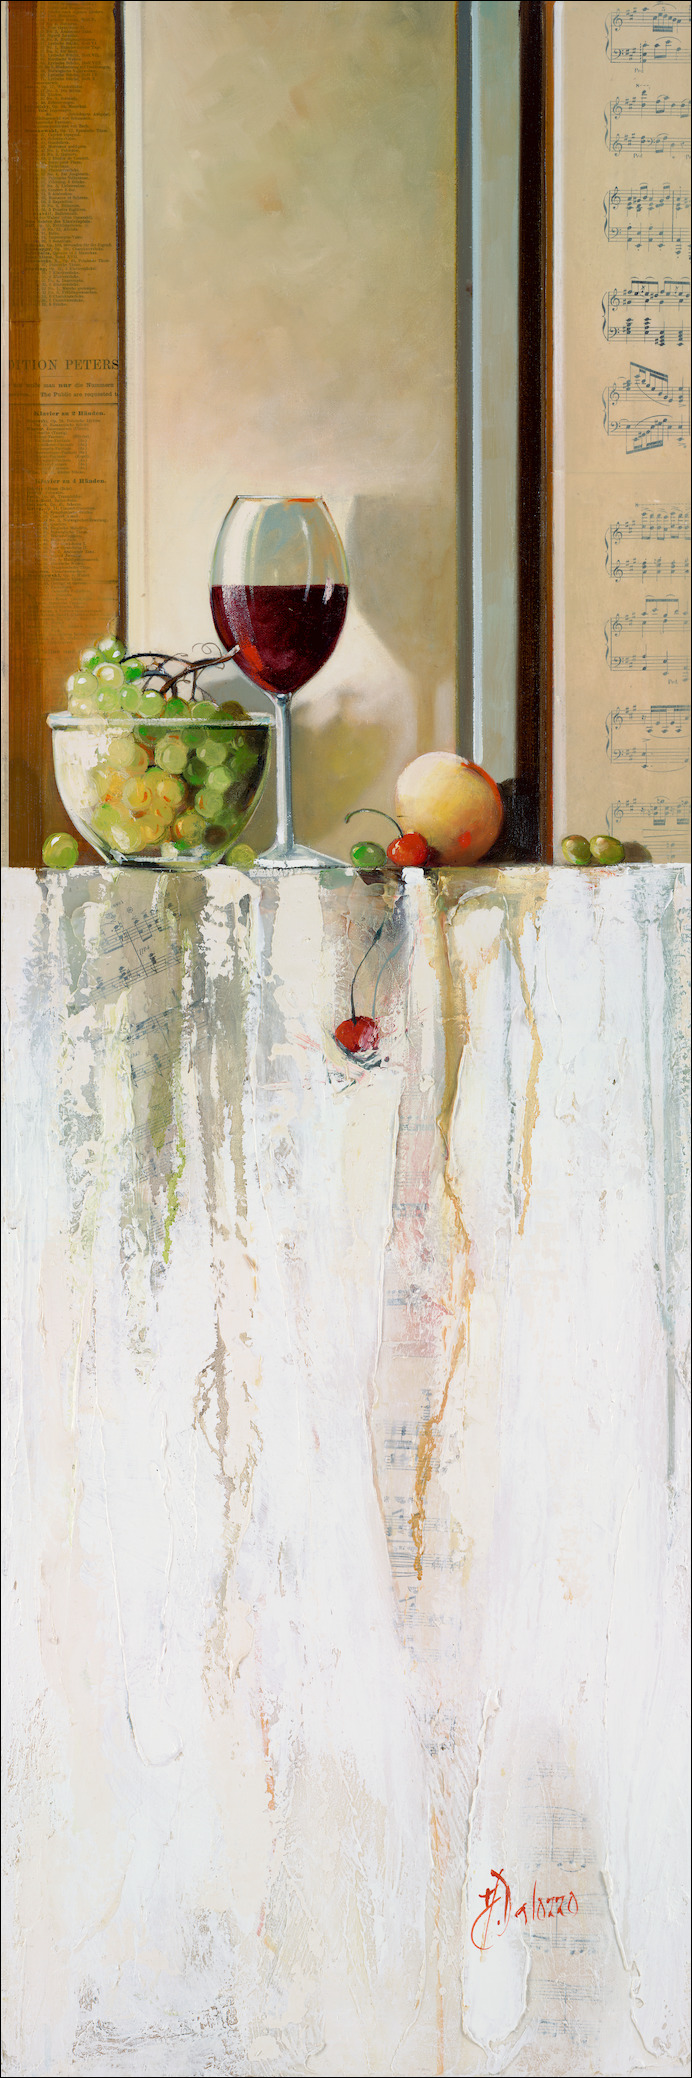 Symphony Still Life "Peaceful Moment" Triptych Right Panel Original Artwork by Judith Dalozzo